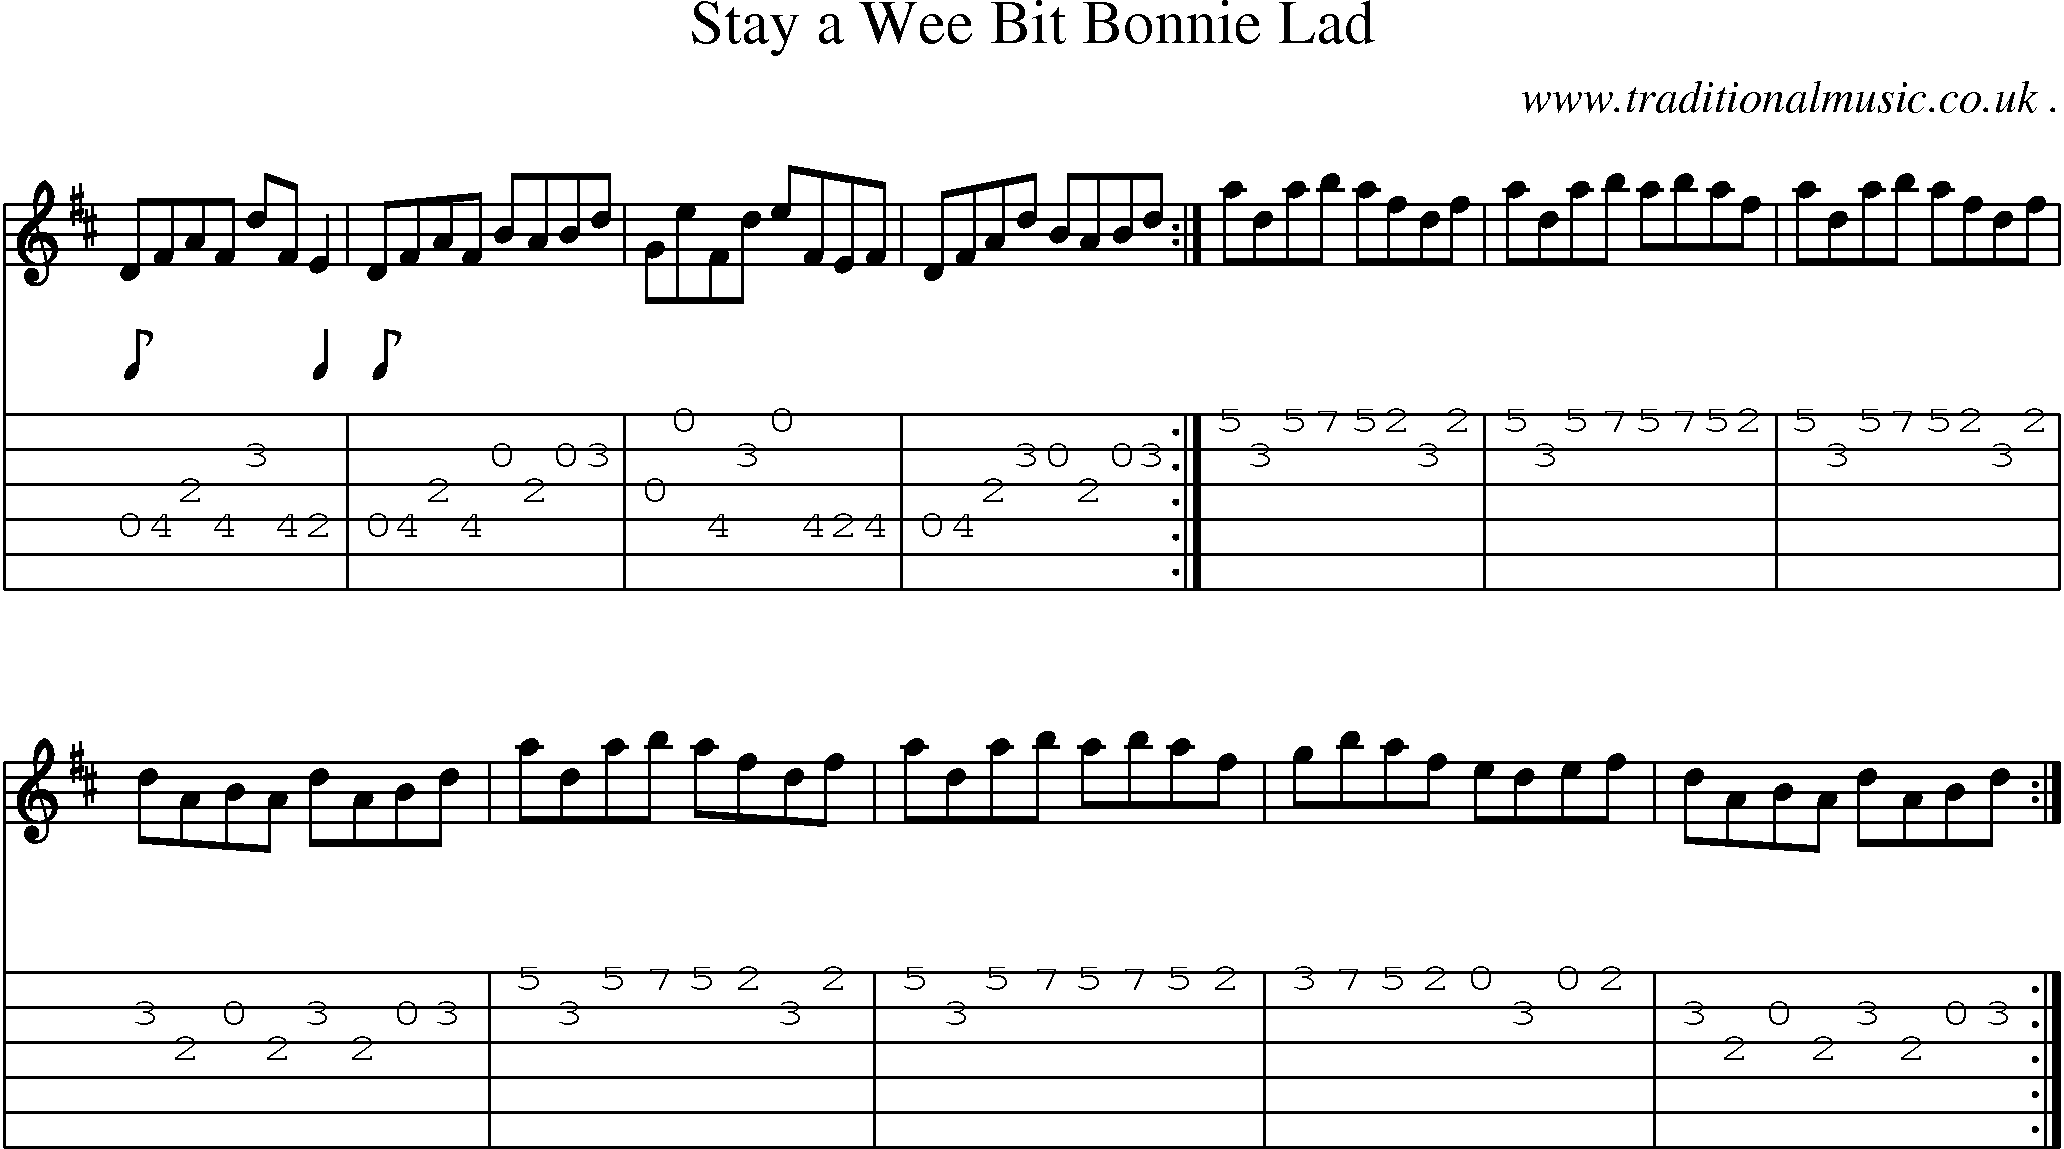 Sheet-Music and Guitar Tabs for Stay A Wee Bit Bonnie Lad